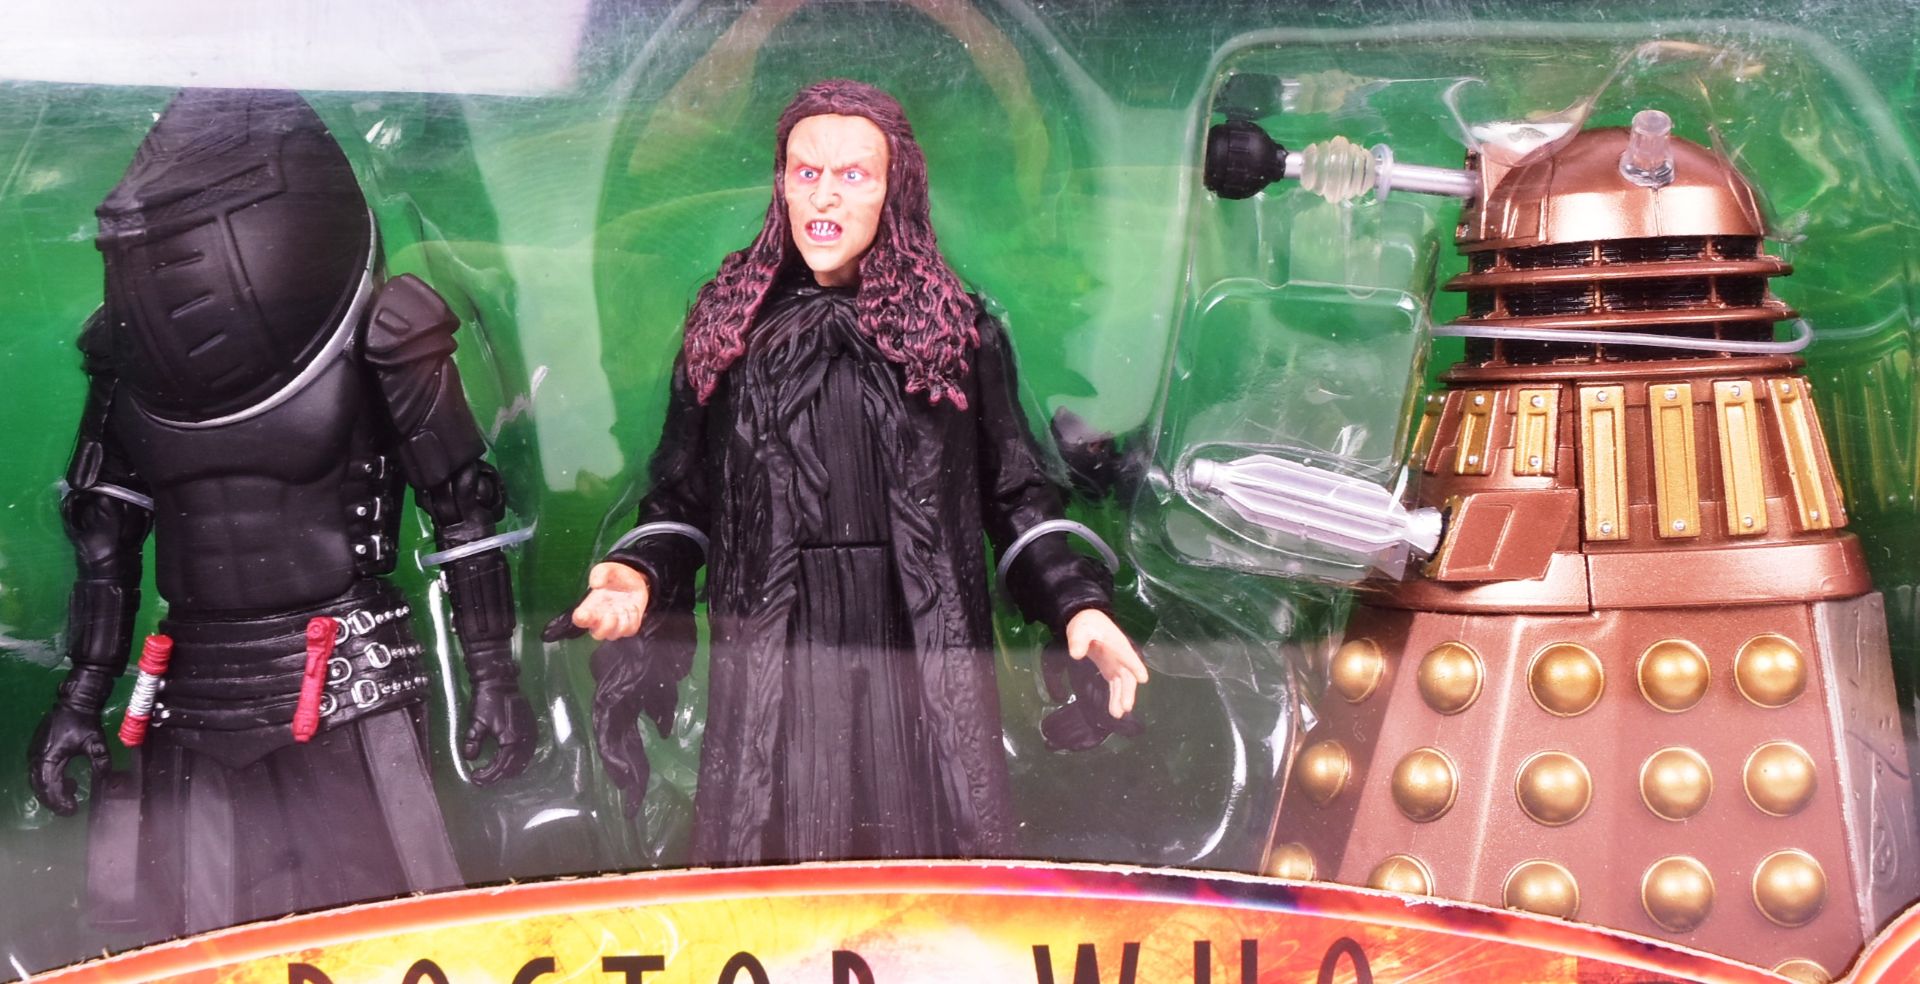 DOCTOR WHO - CHARACTER OPTIONS - ACTION FIGURE SET - Image 3 of 4